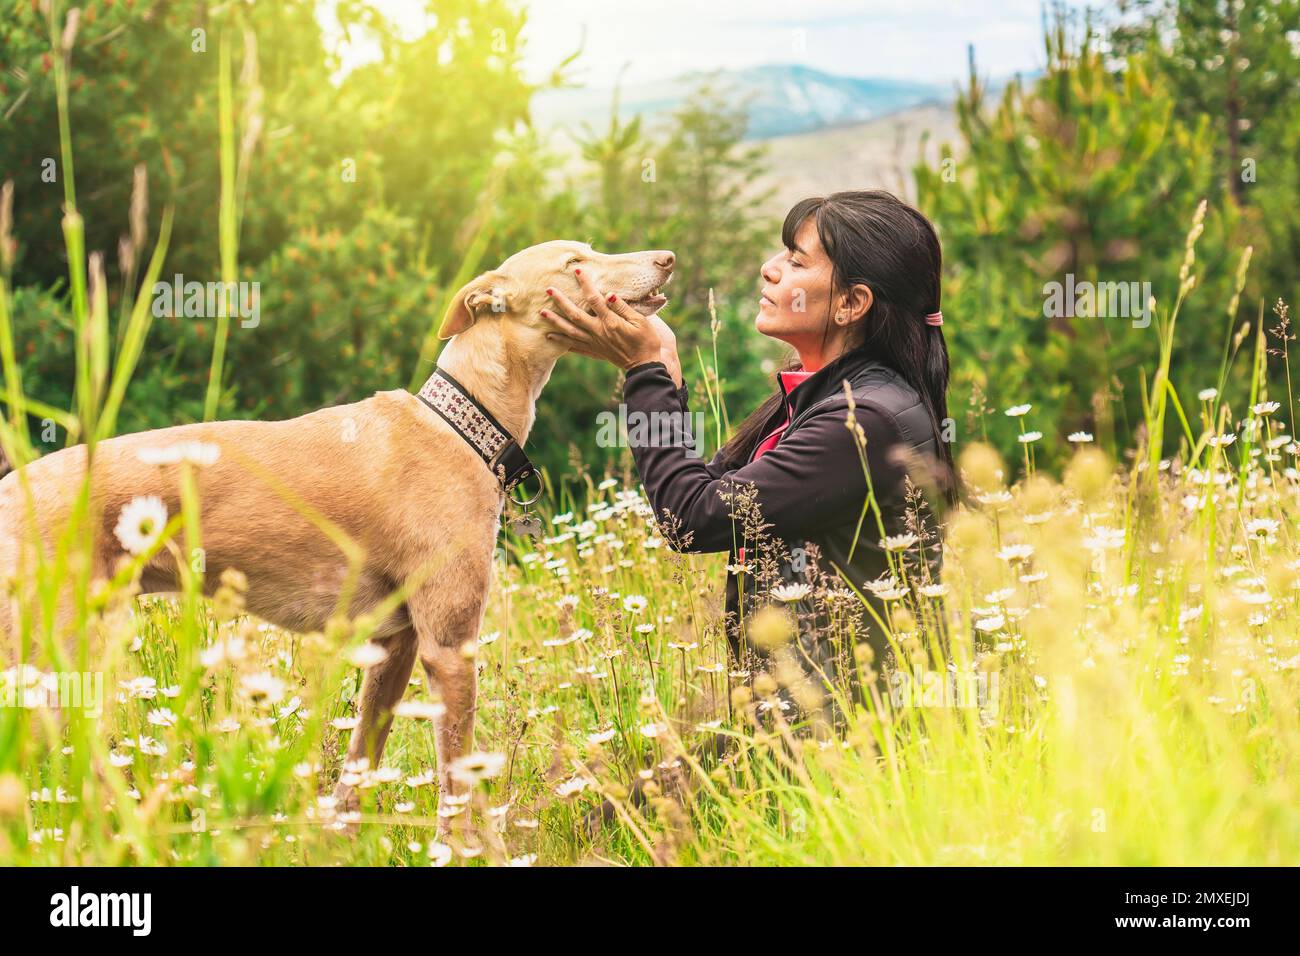 Latin woman and her dog together. Friendship between dog and pet owner. Woman sitting with her greyhound in nature. Stock Photo